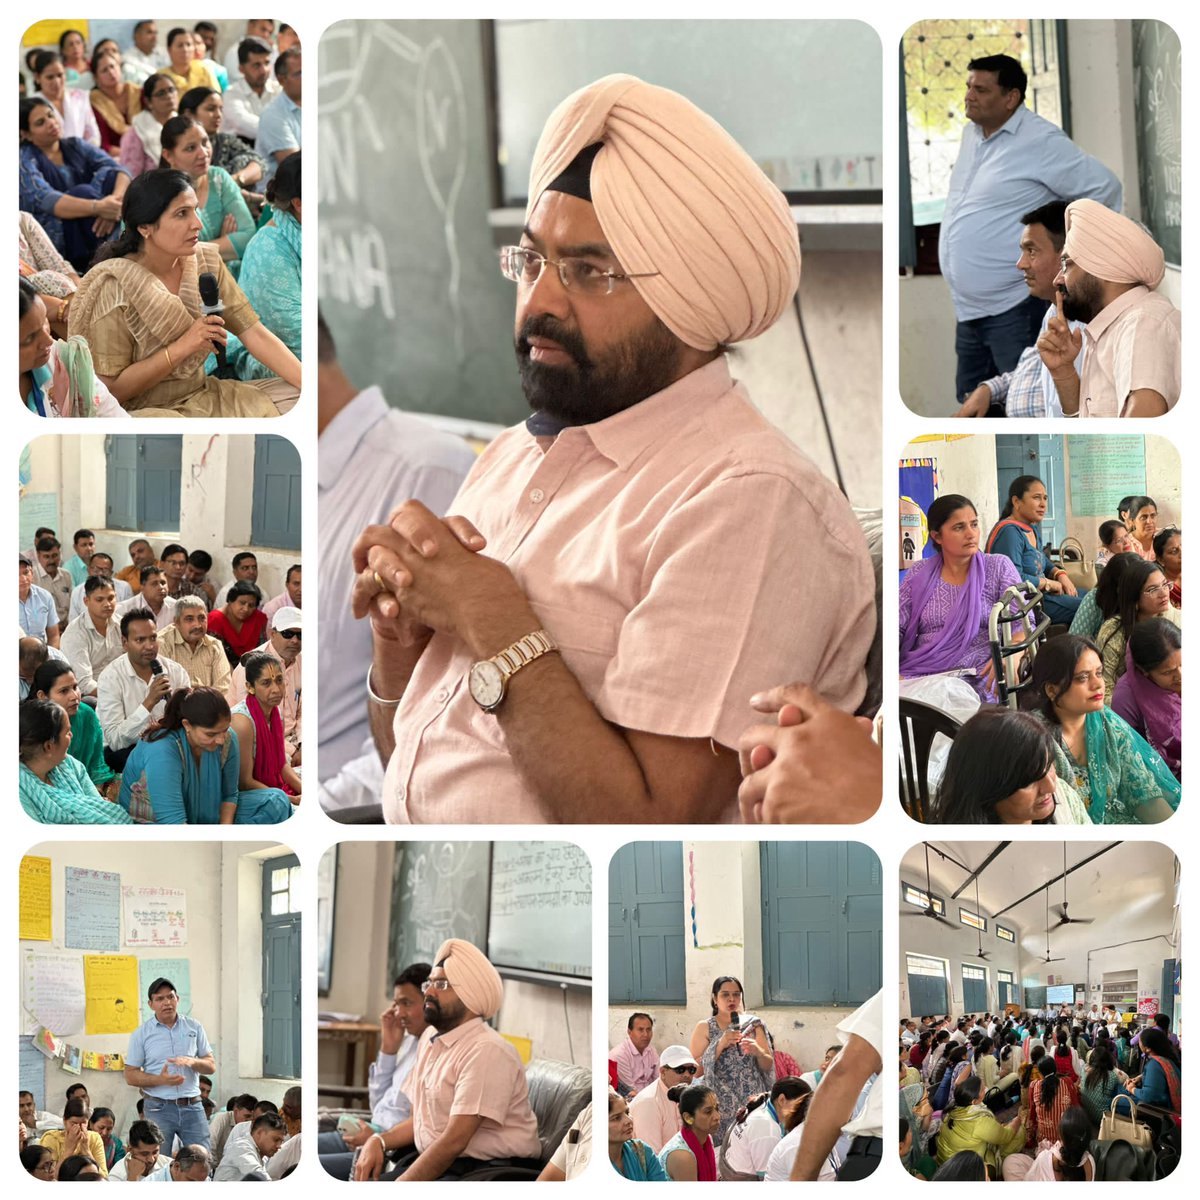 Our esteemed DGEE enriched the Teacher Training Workshop in Jhajjar District, engaging with 80 teachers and Master Trainers, underscoring their crucial contribution to the NIPUN Haryana Mission. @EduMinOfIndia #NIPUNHaryanaMission #TeacherTraining